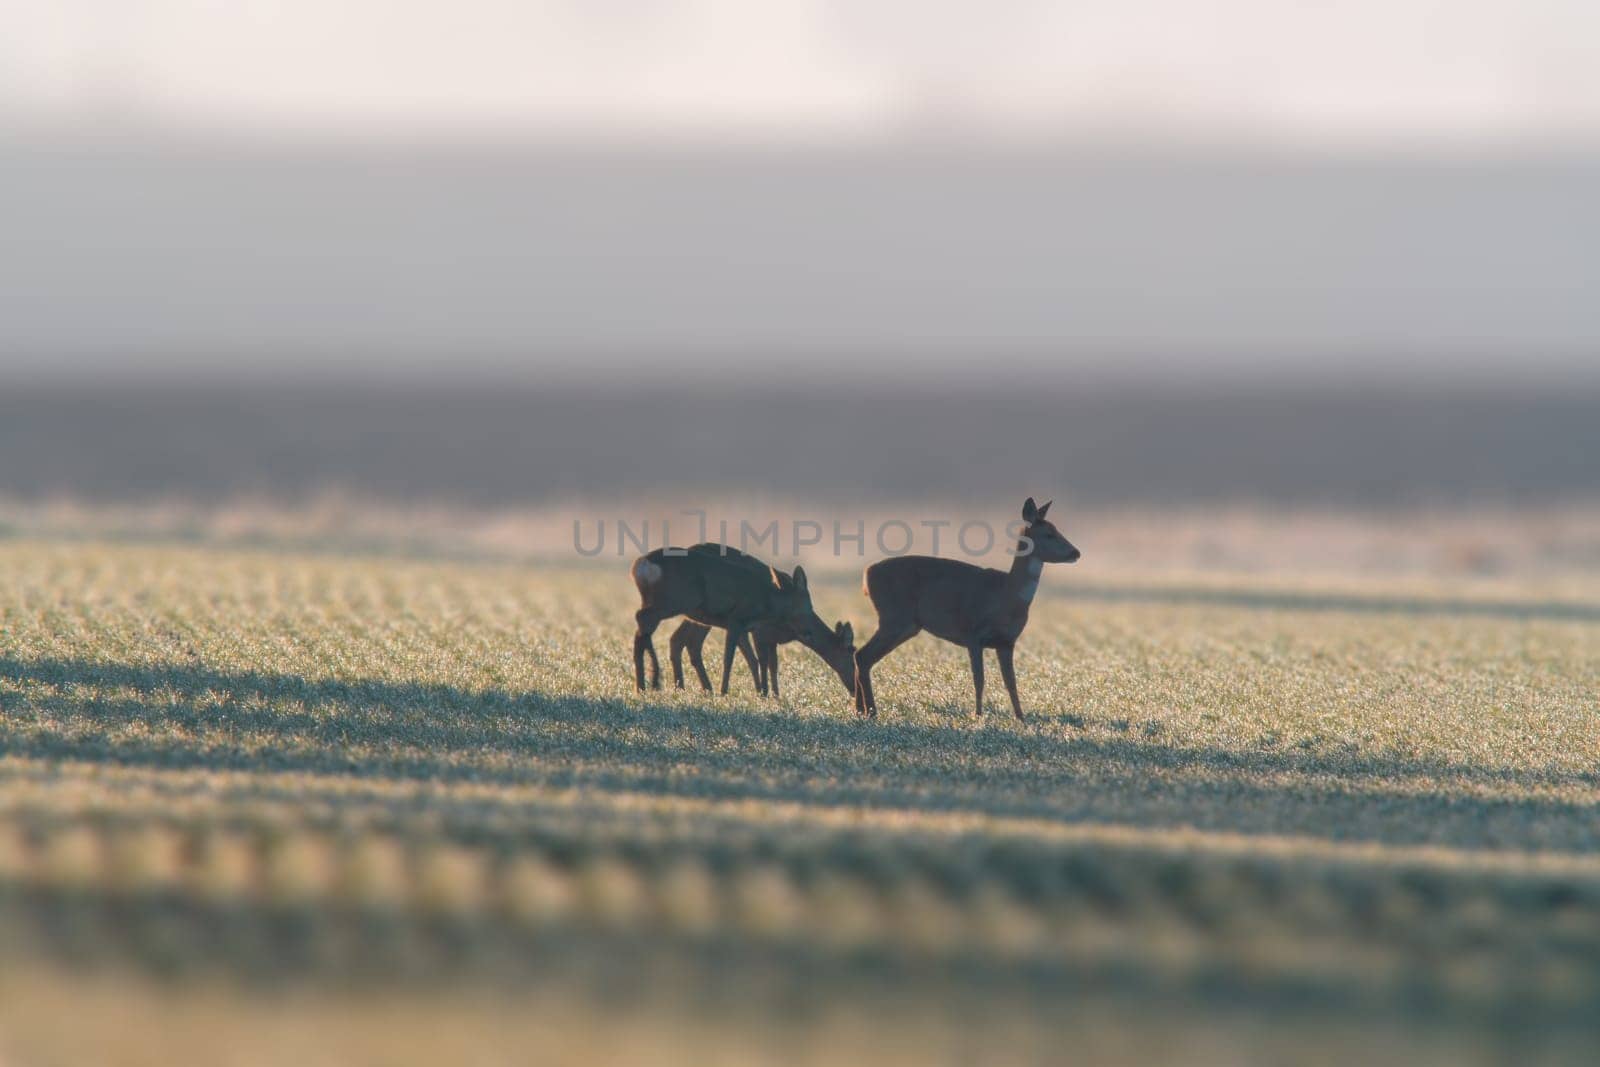 one group of deer in a field in winter by mario_plechaty_photography